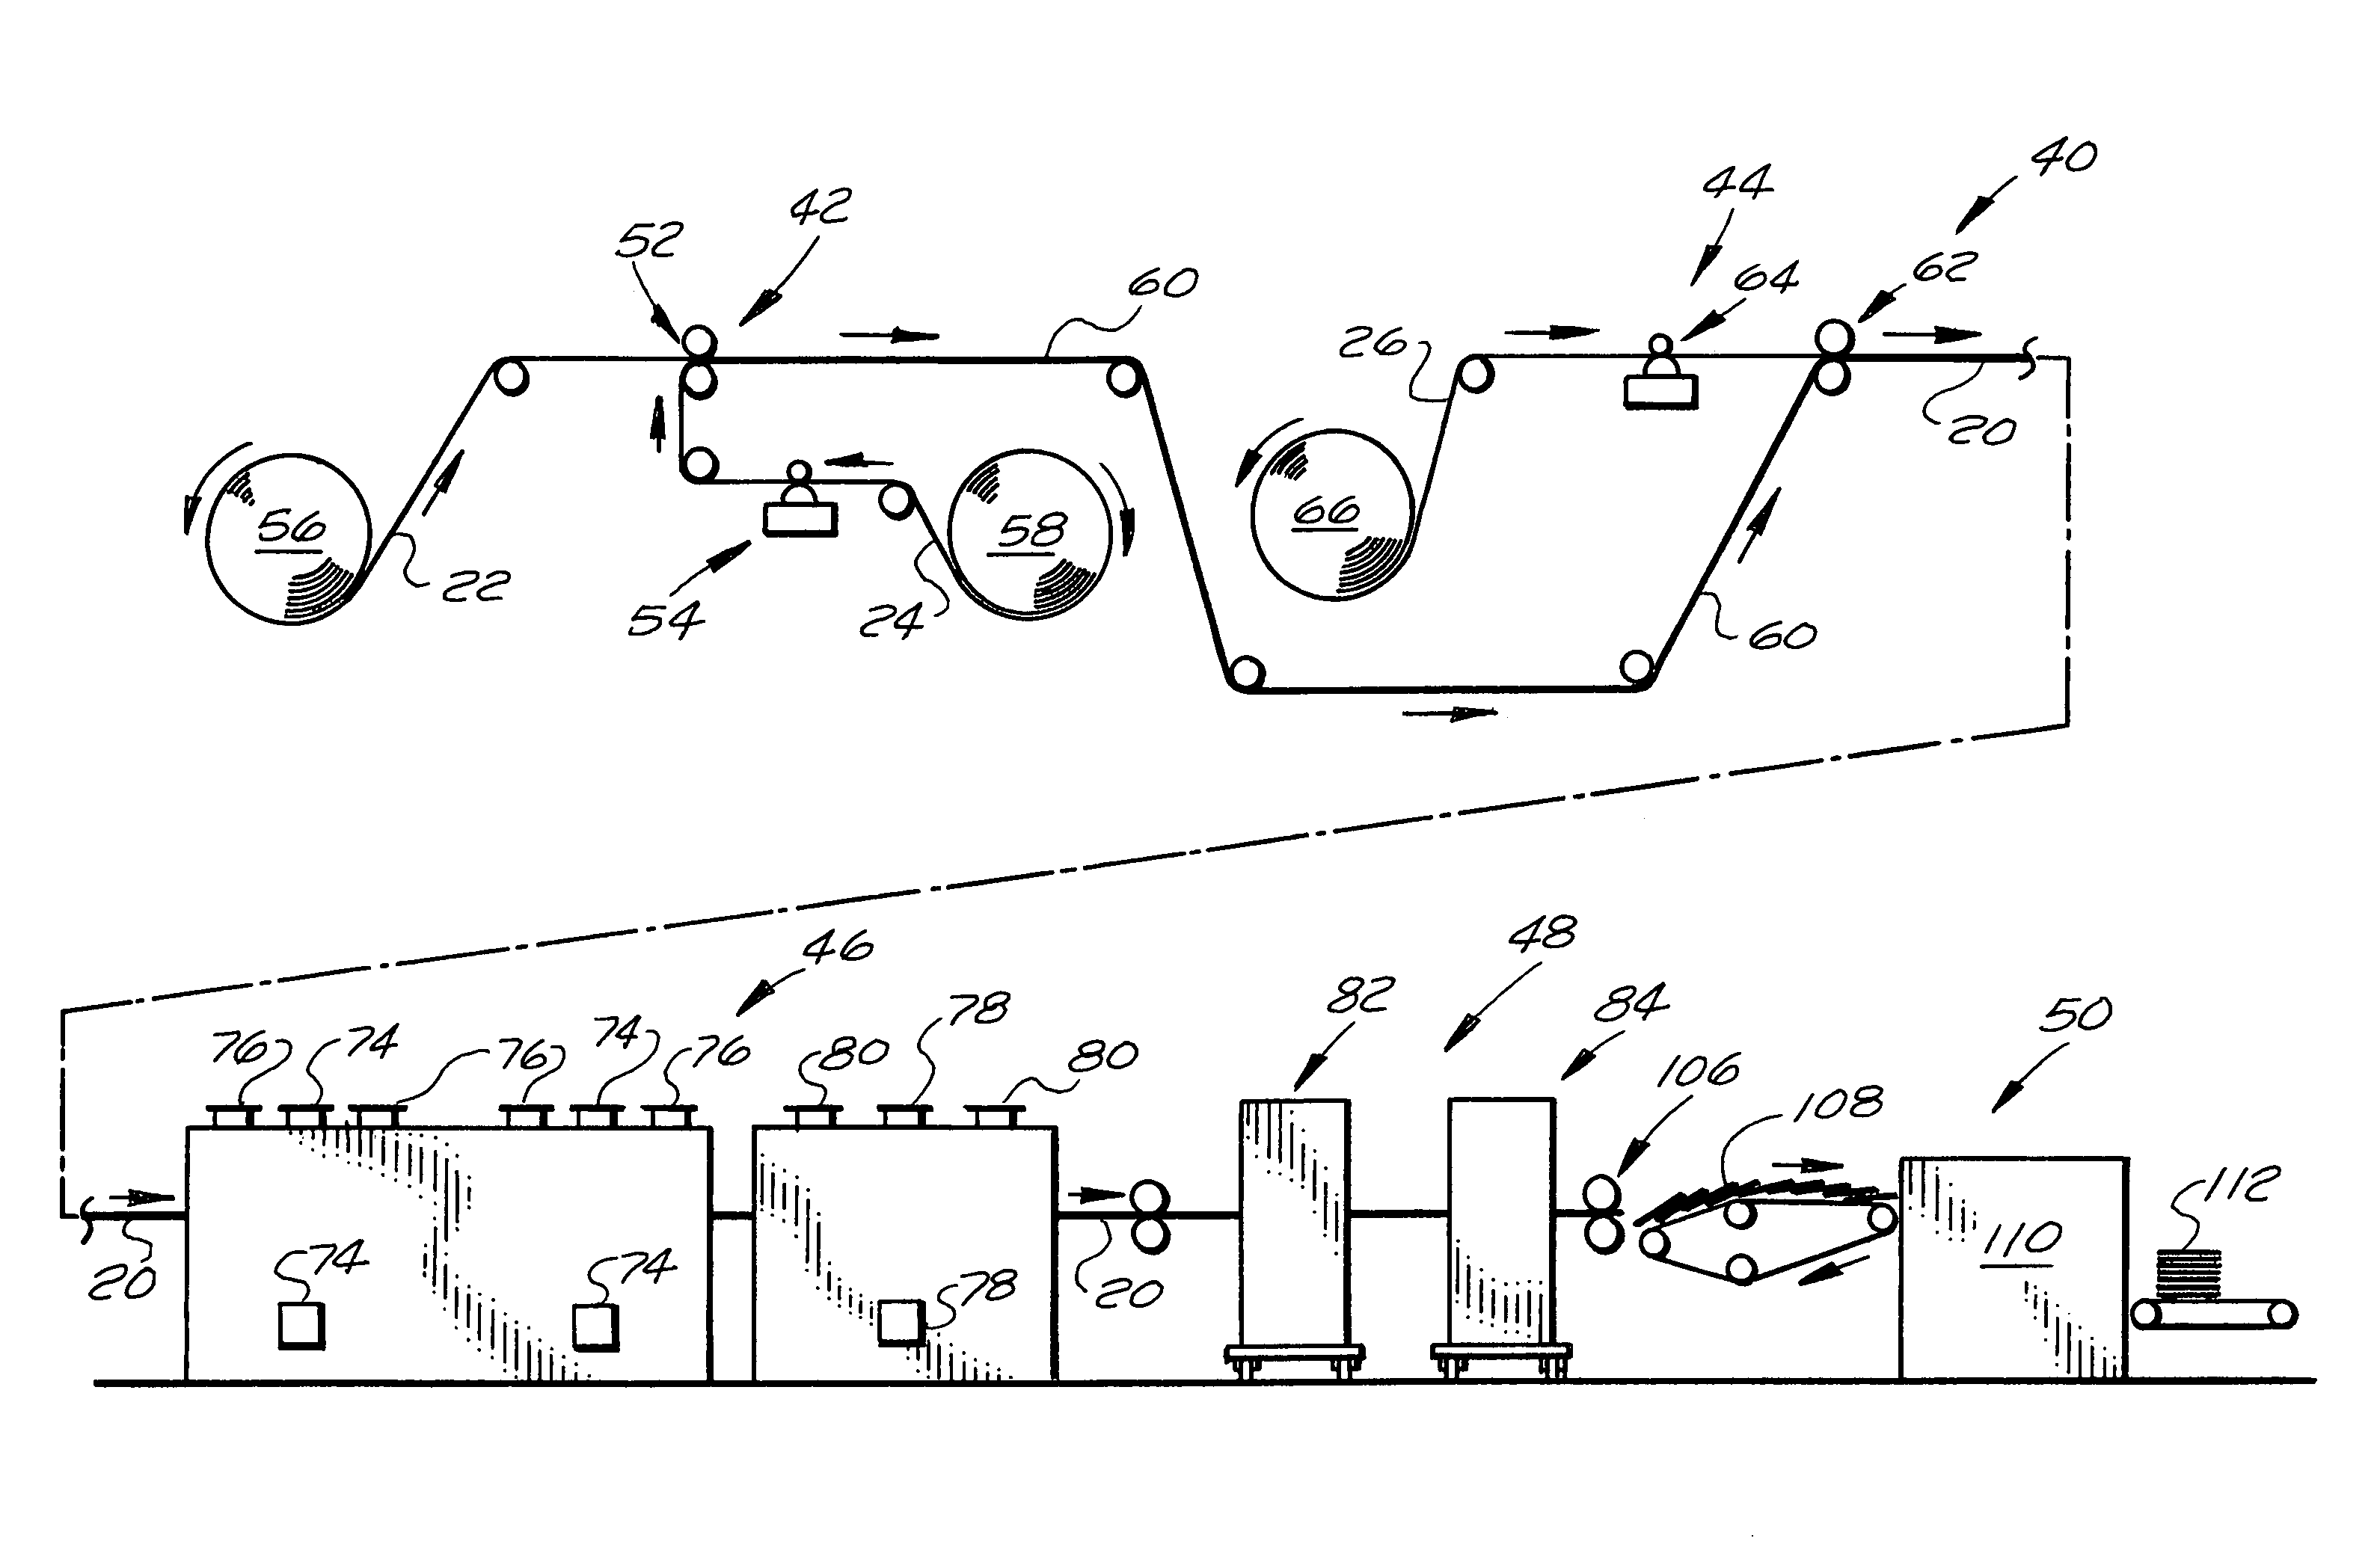 Method and apparatus for forming corrugated board carton blanks